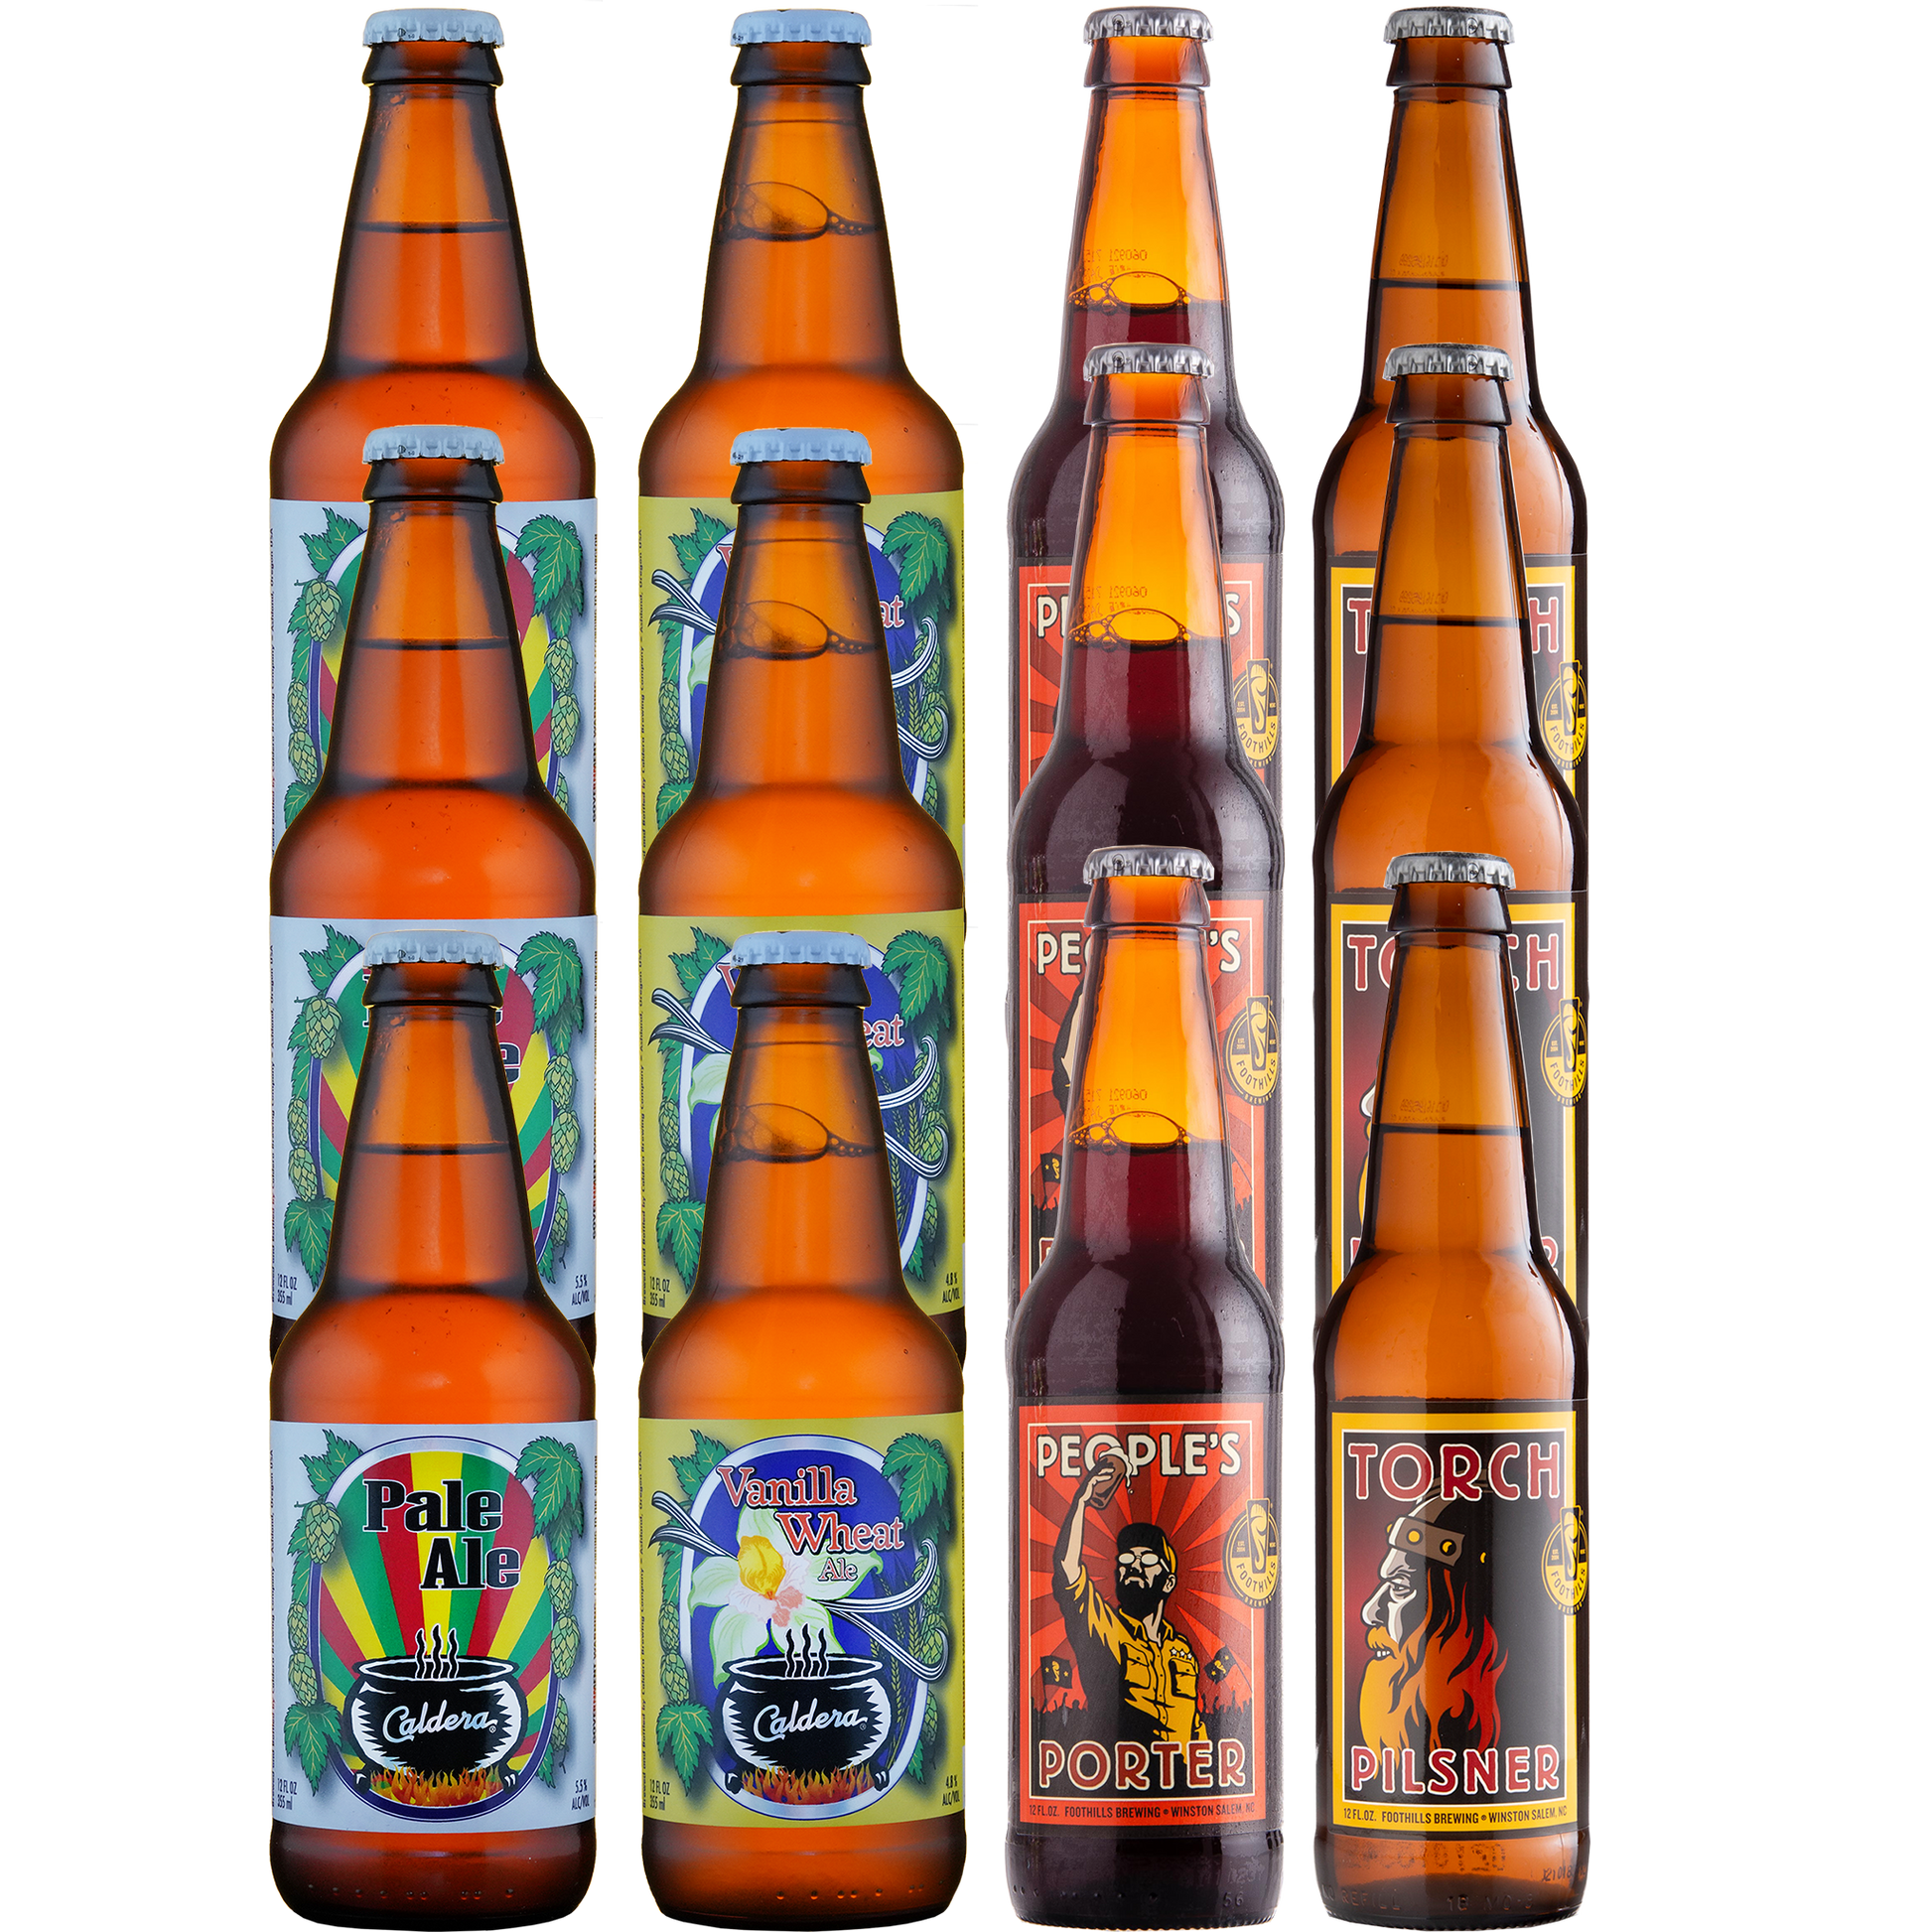 A combo pack of beers from Caldera Brewing Co and Foothills Brewing Company